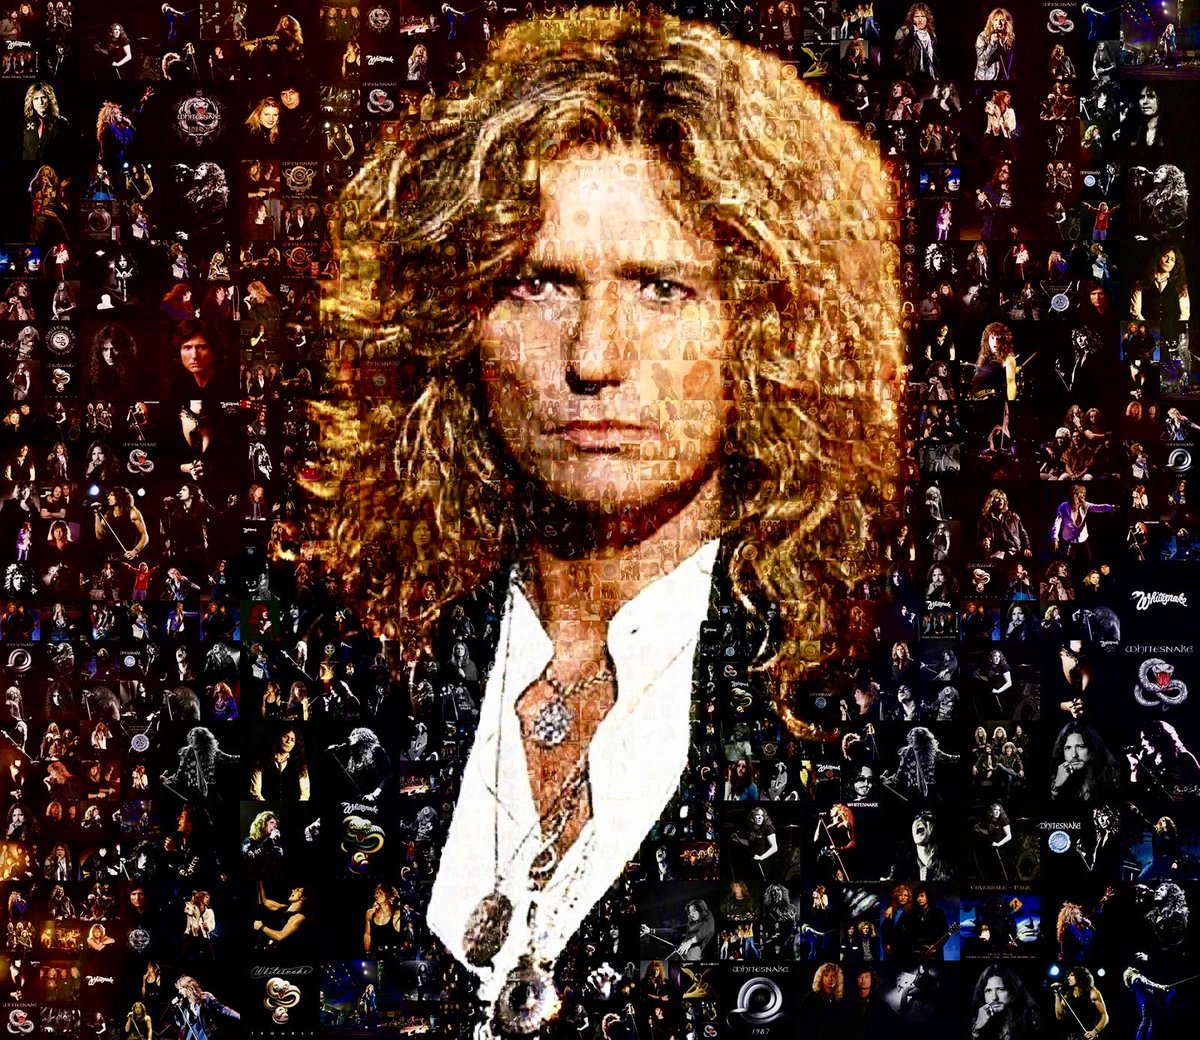 GOOOOD Morning, Afternoon & Good Evening To You, Wherever You Are In Our World…I Hope ALL Is Well With YOU & YOURS & You’re Grabbing The Day By The Short n’ Curlies…Take Care Out There & Know You Are Appreciated & Loved 4 Who YOU Are & 4 All YOU Do…& That’s A Fact…❌❌❌